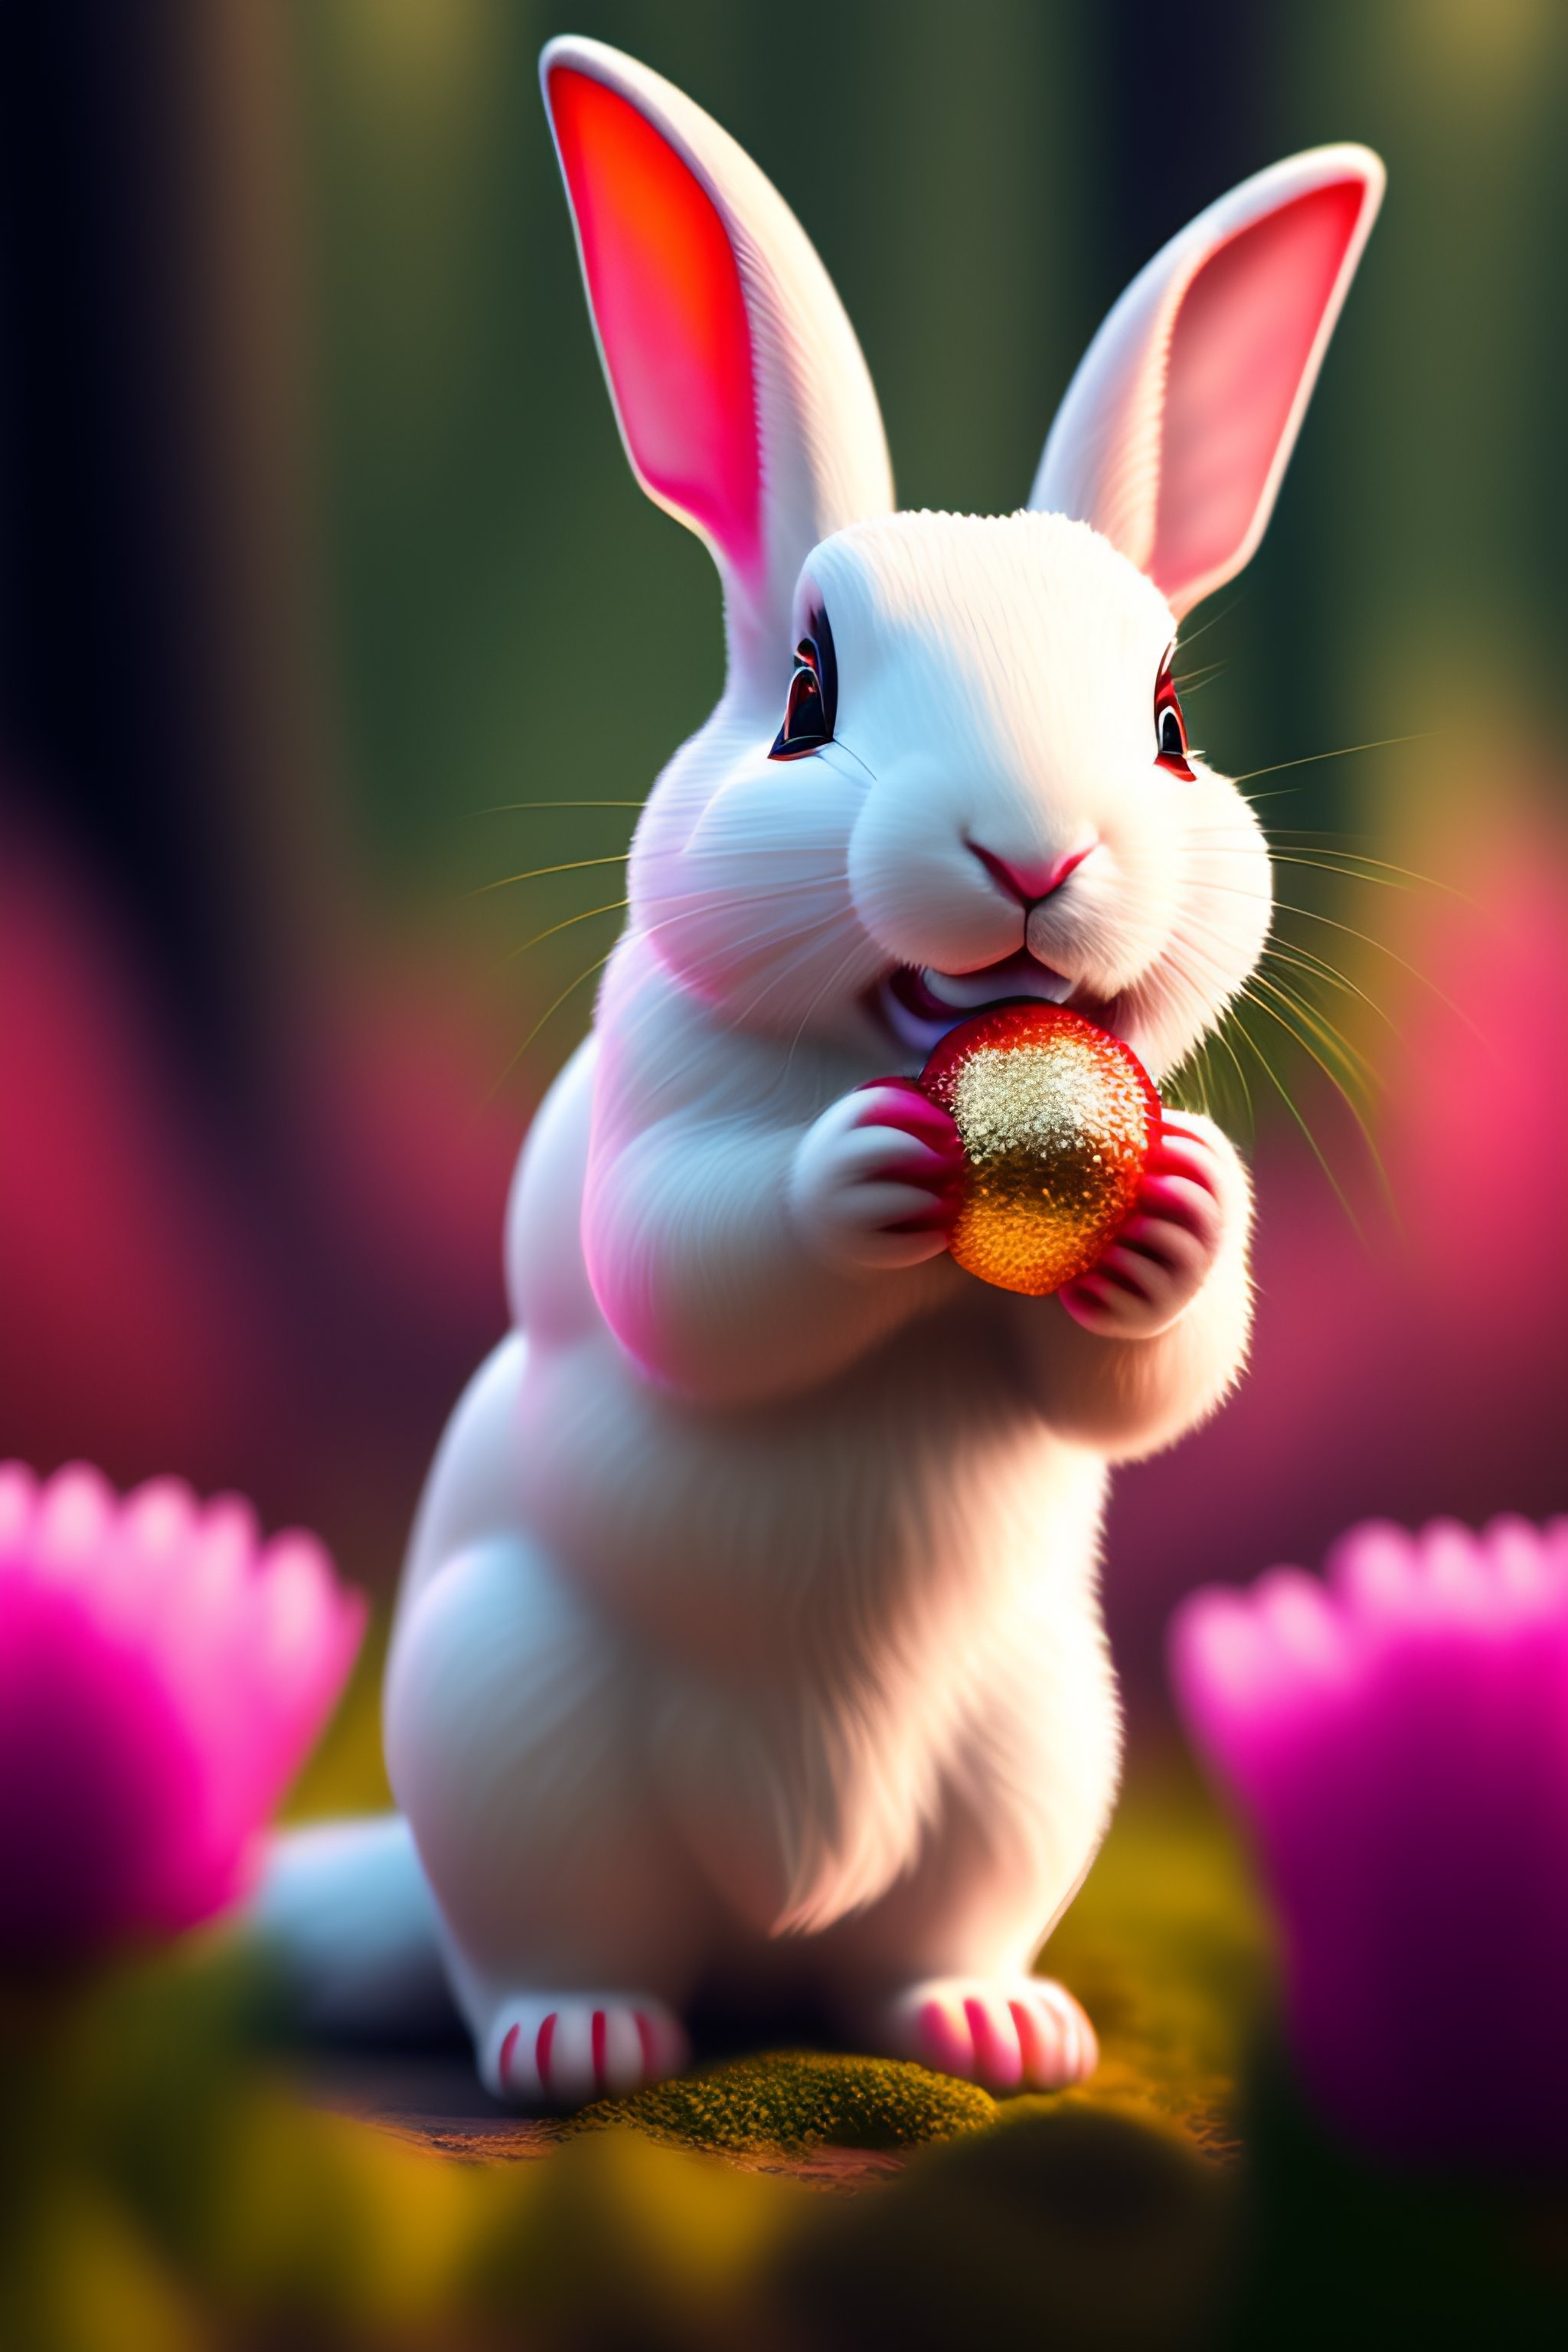 8,223 Red Eyes Rabbit Images, Stock Photos, 3D objects, & Vectors